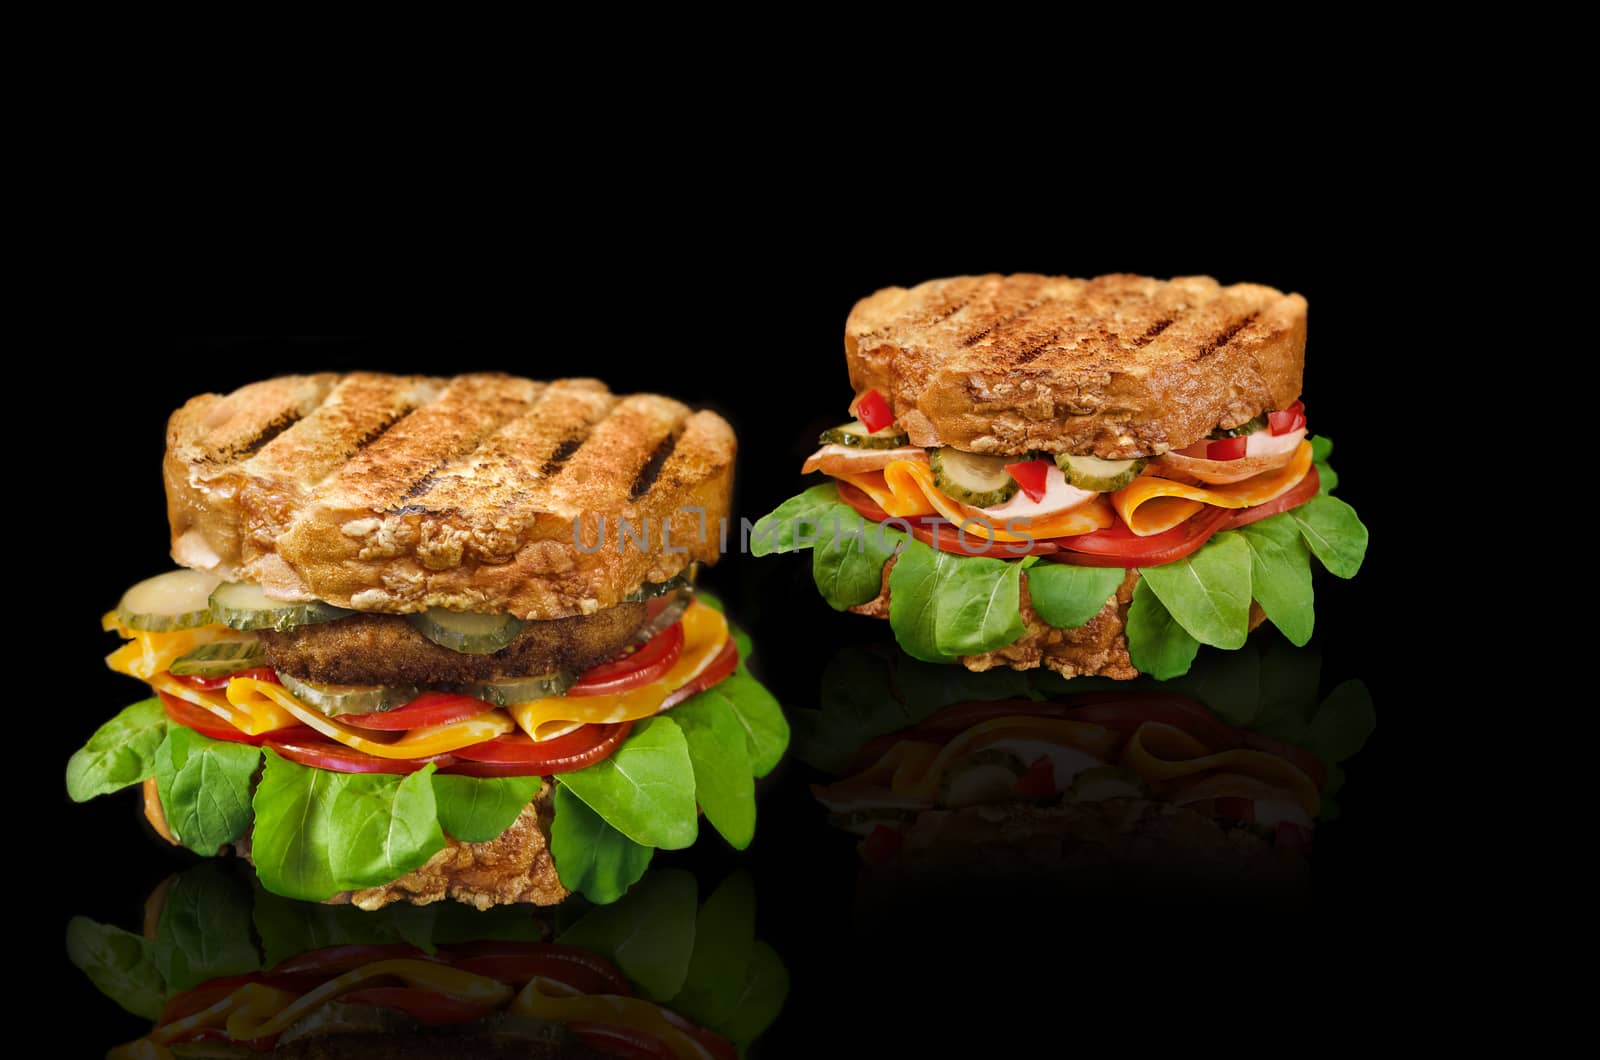 Two sandwiches with various fillings on a black background, with a cutlet, cheese, tomatoes, ham, cucumbers and herbs.